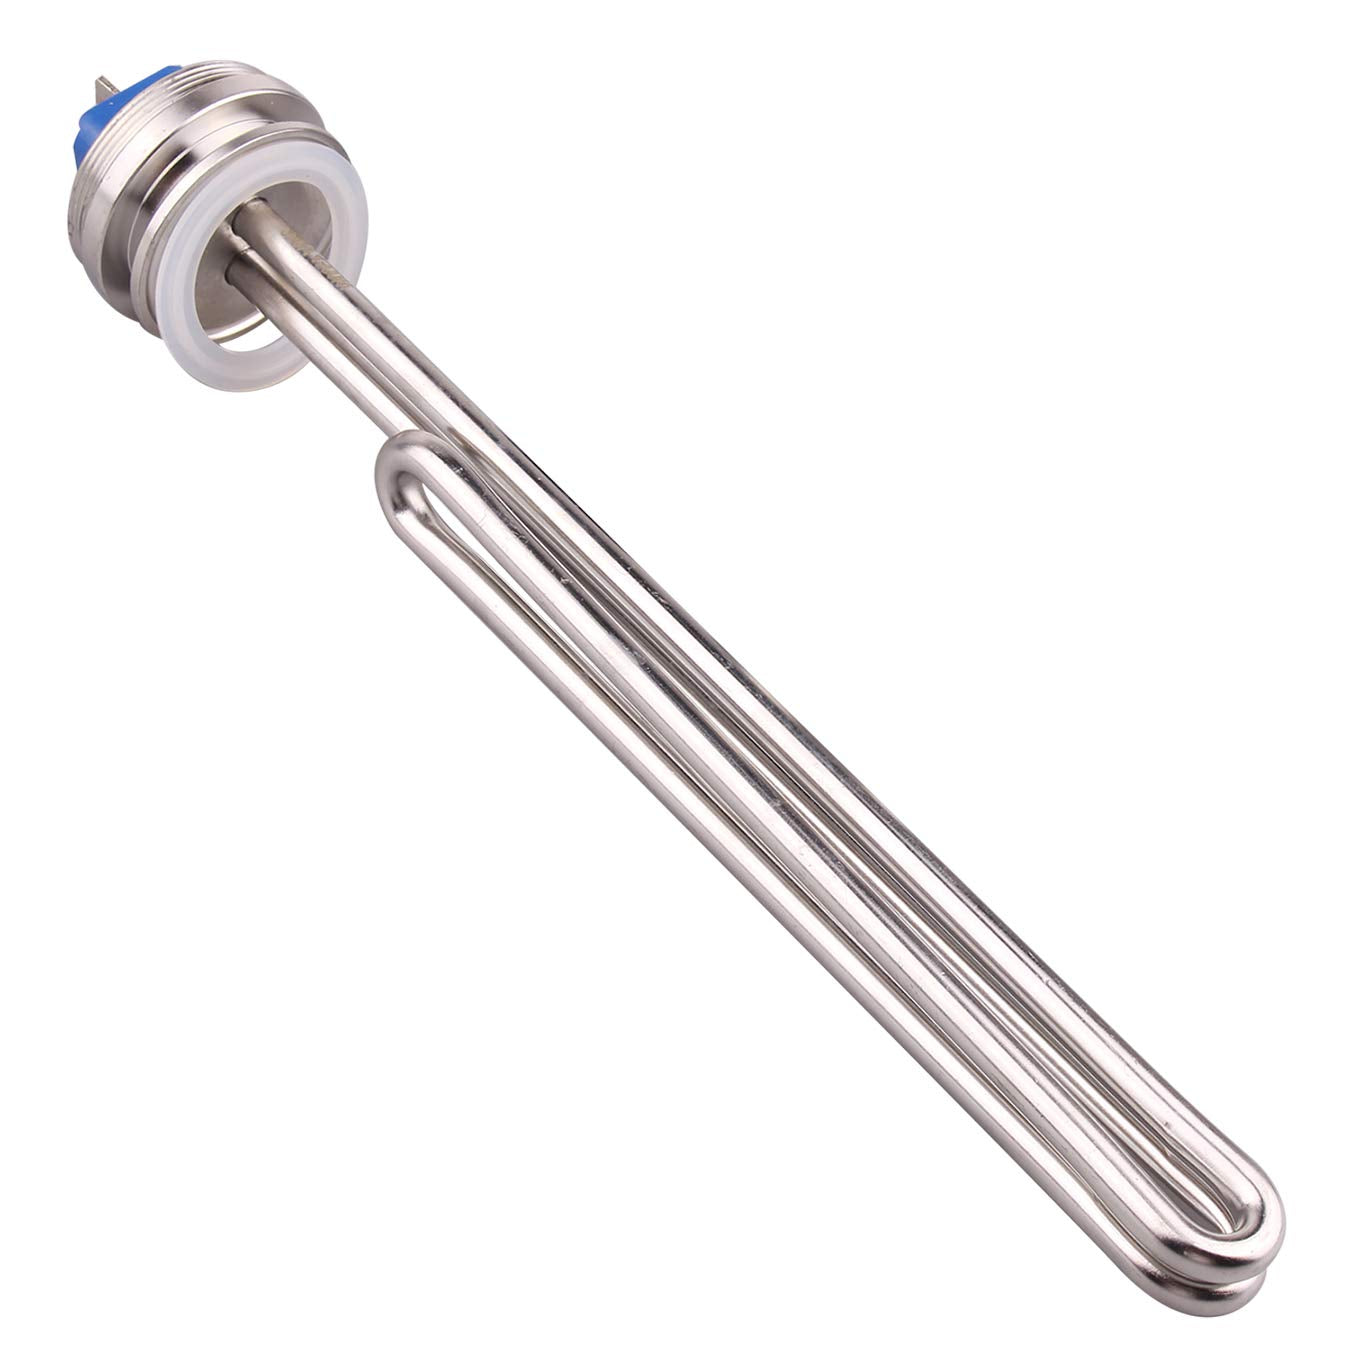 1.5" Inch (Od50.5Mm) Tri-Clamp Foldback Heating Element Stainless Steel Immersion Water Heater (240V 4500W)